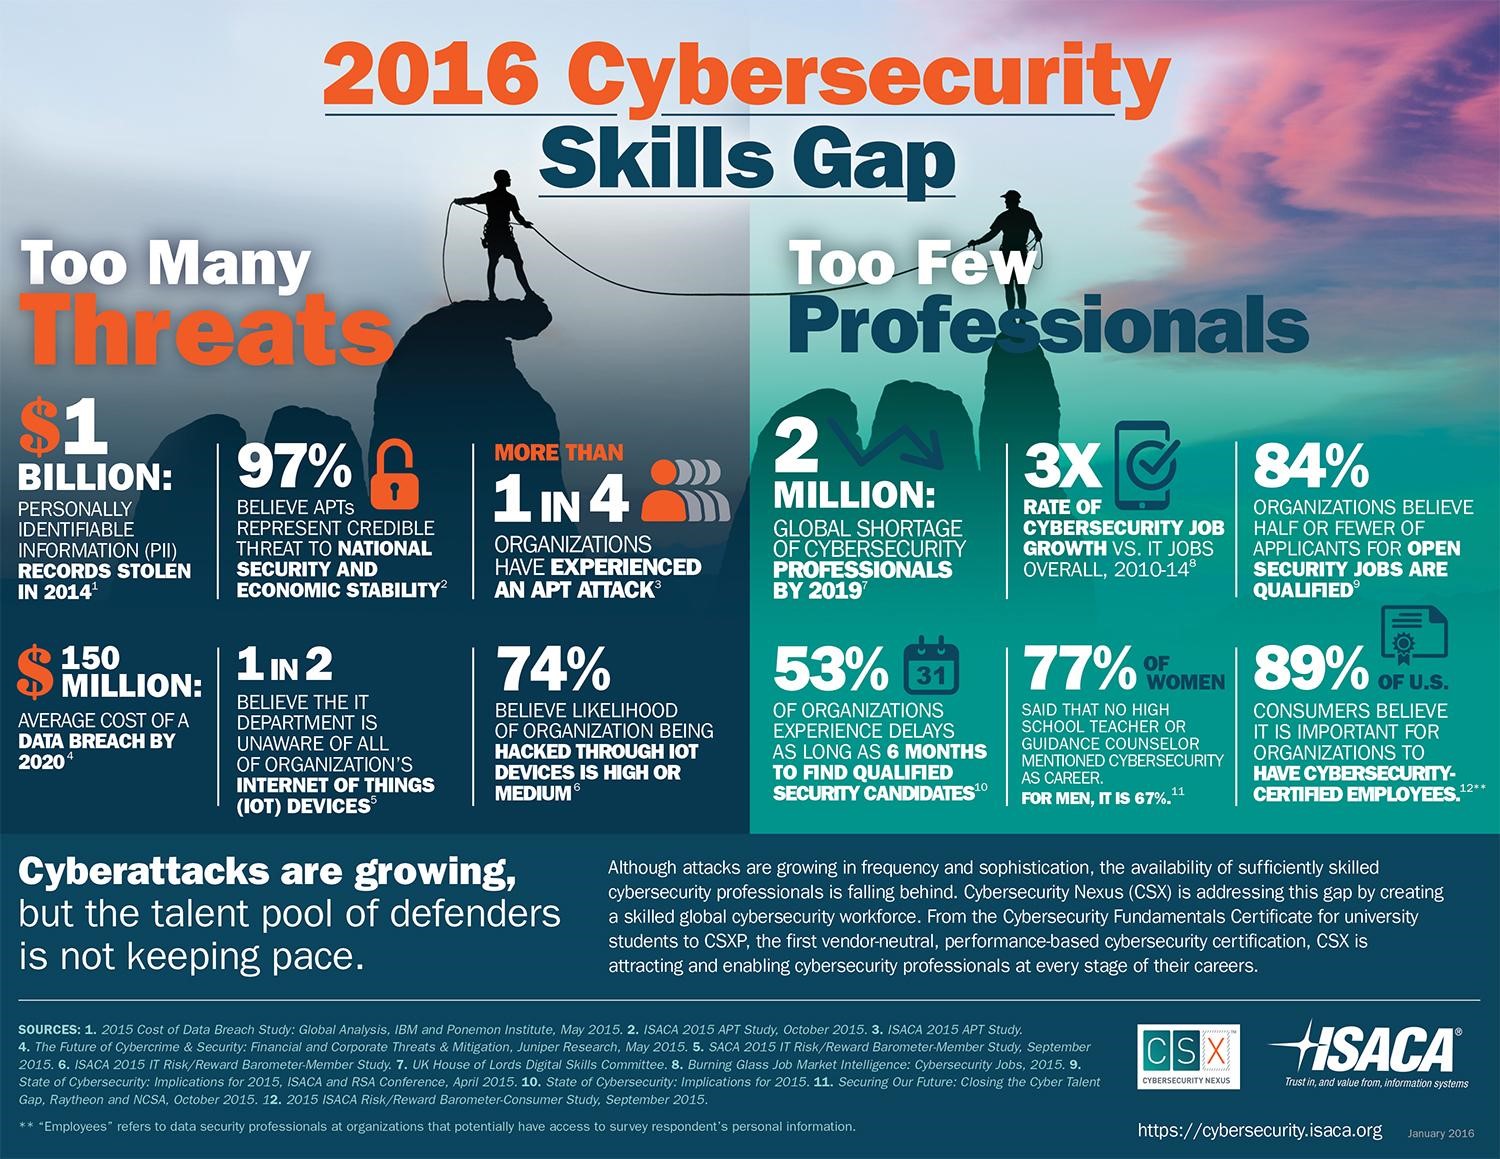 The Cyber Security gap. Jobs to grow.